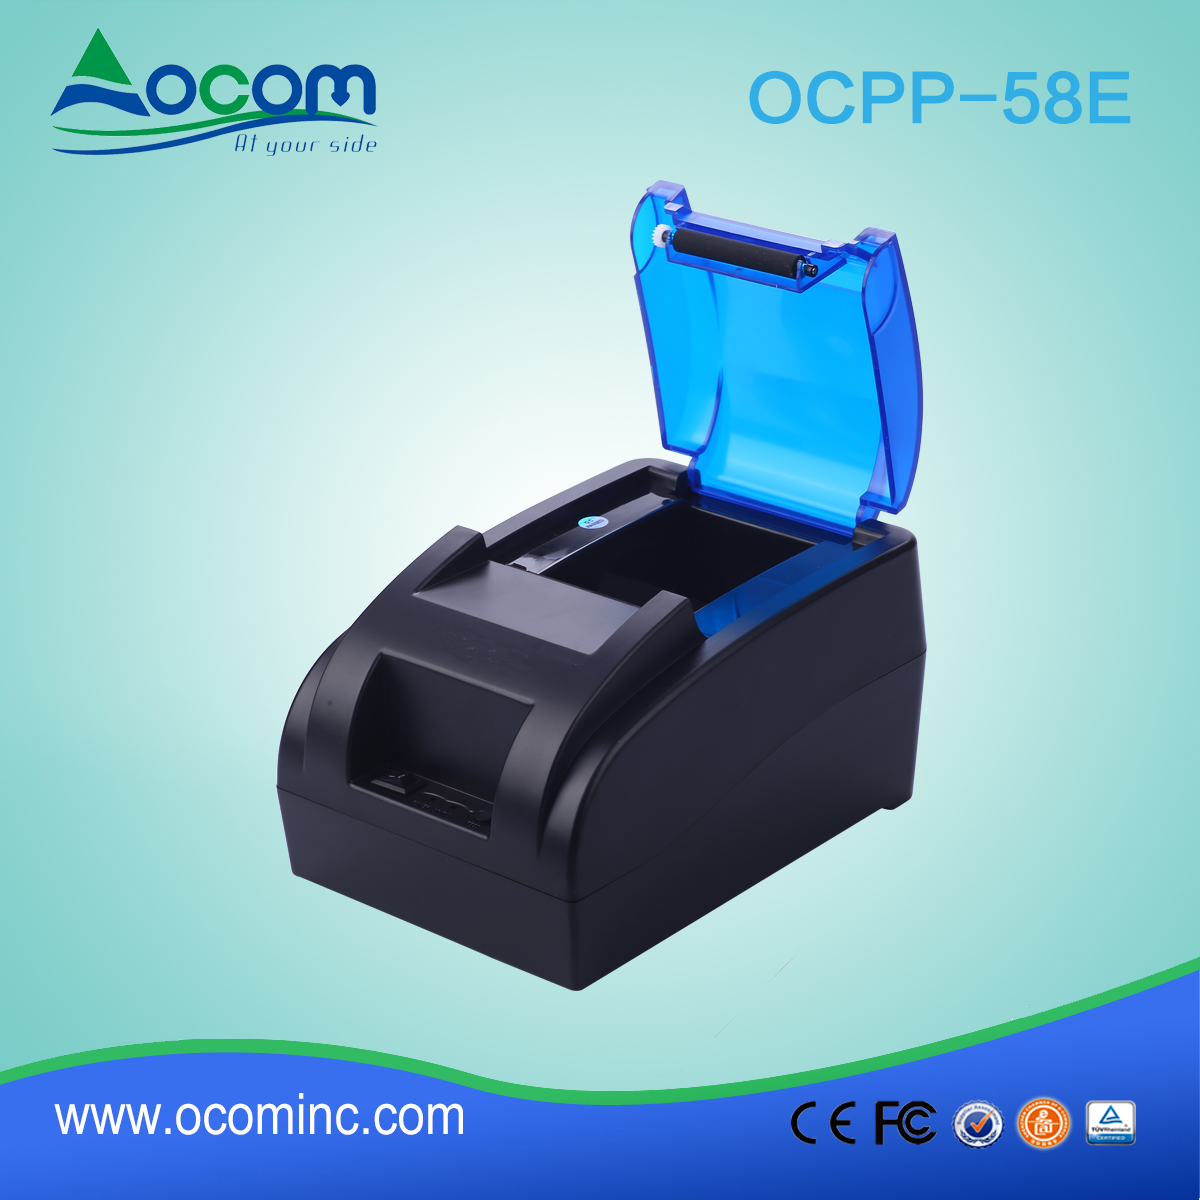 58mm thermal receipt printer with built-in power adaptor OCPP-58E-BT